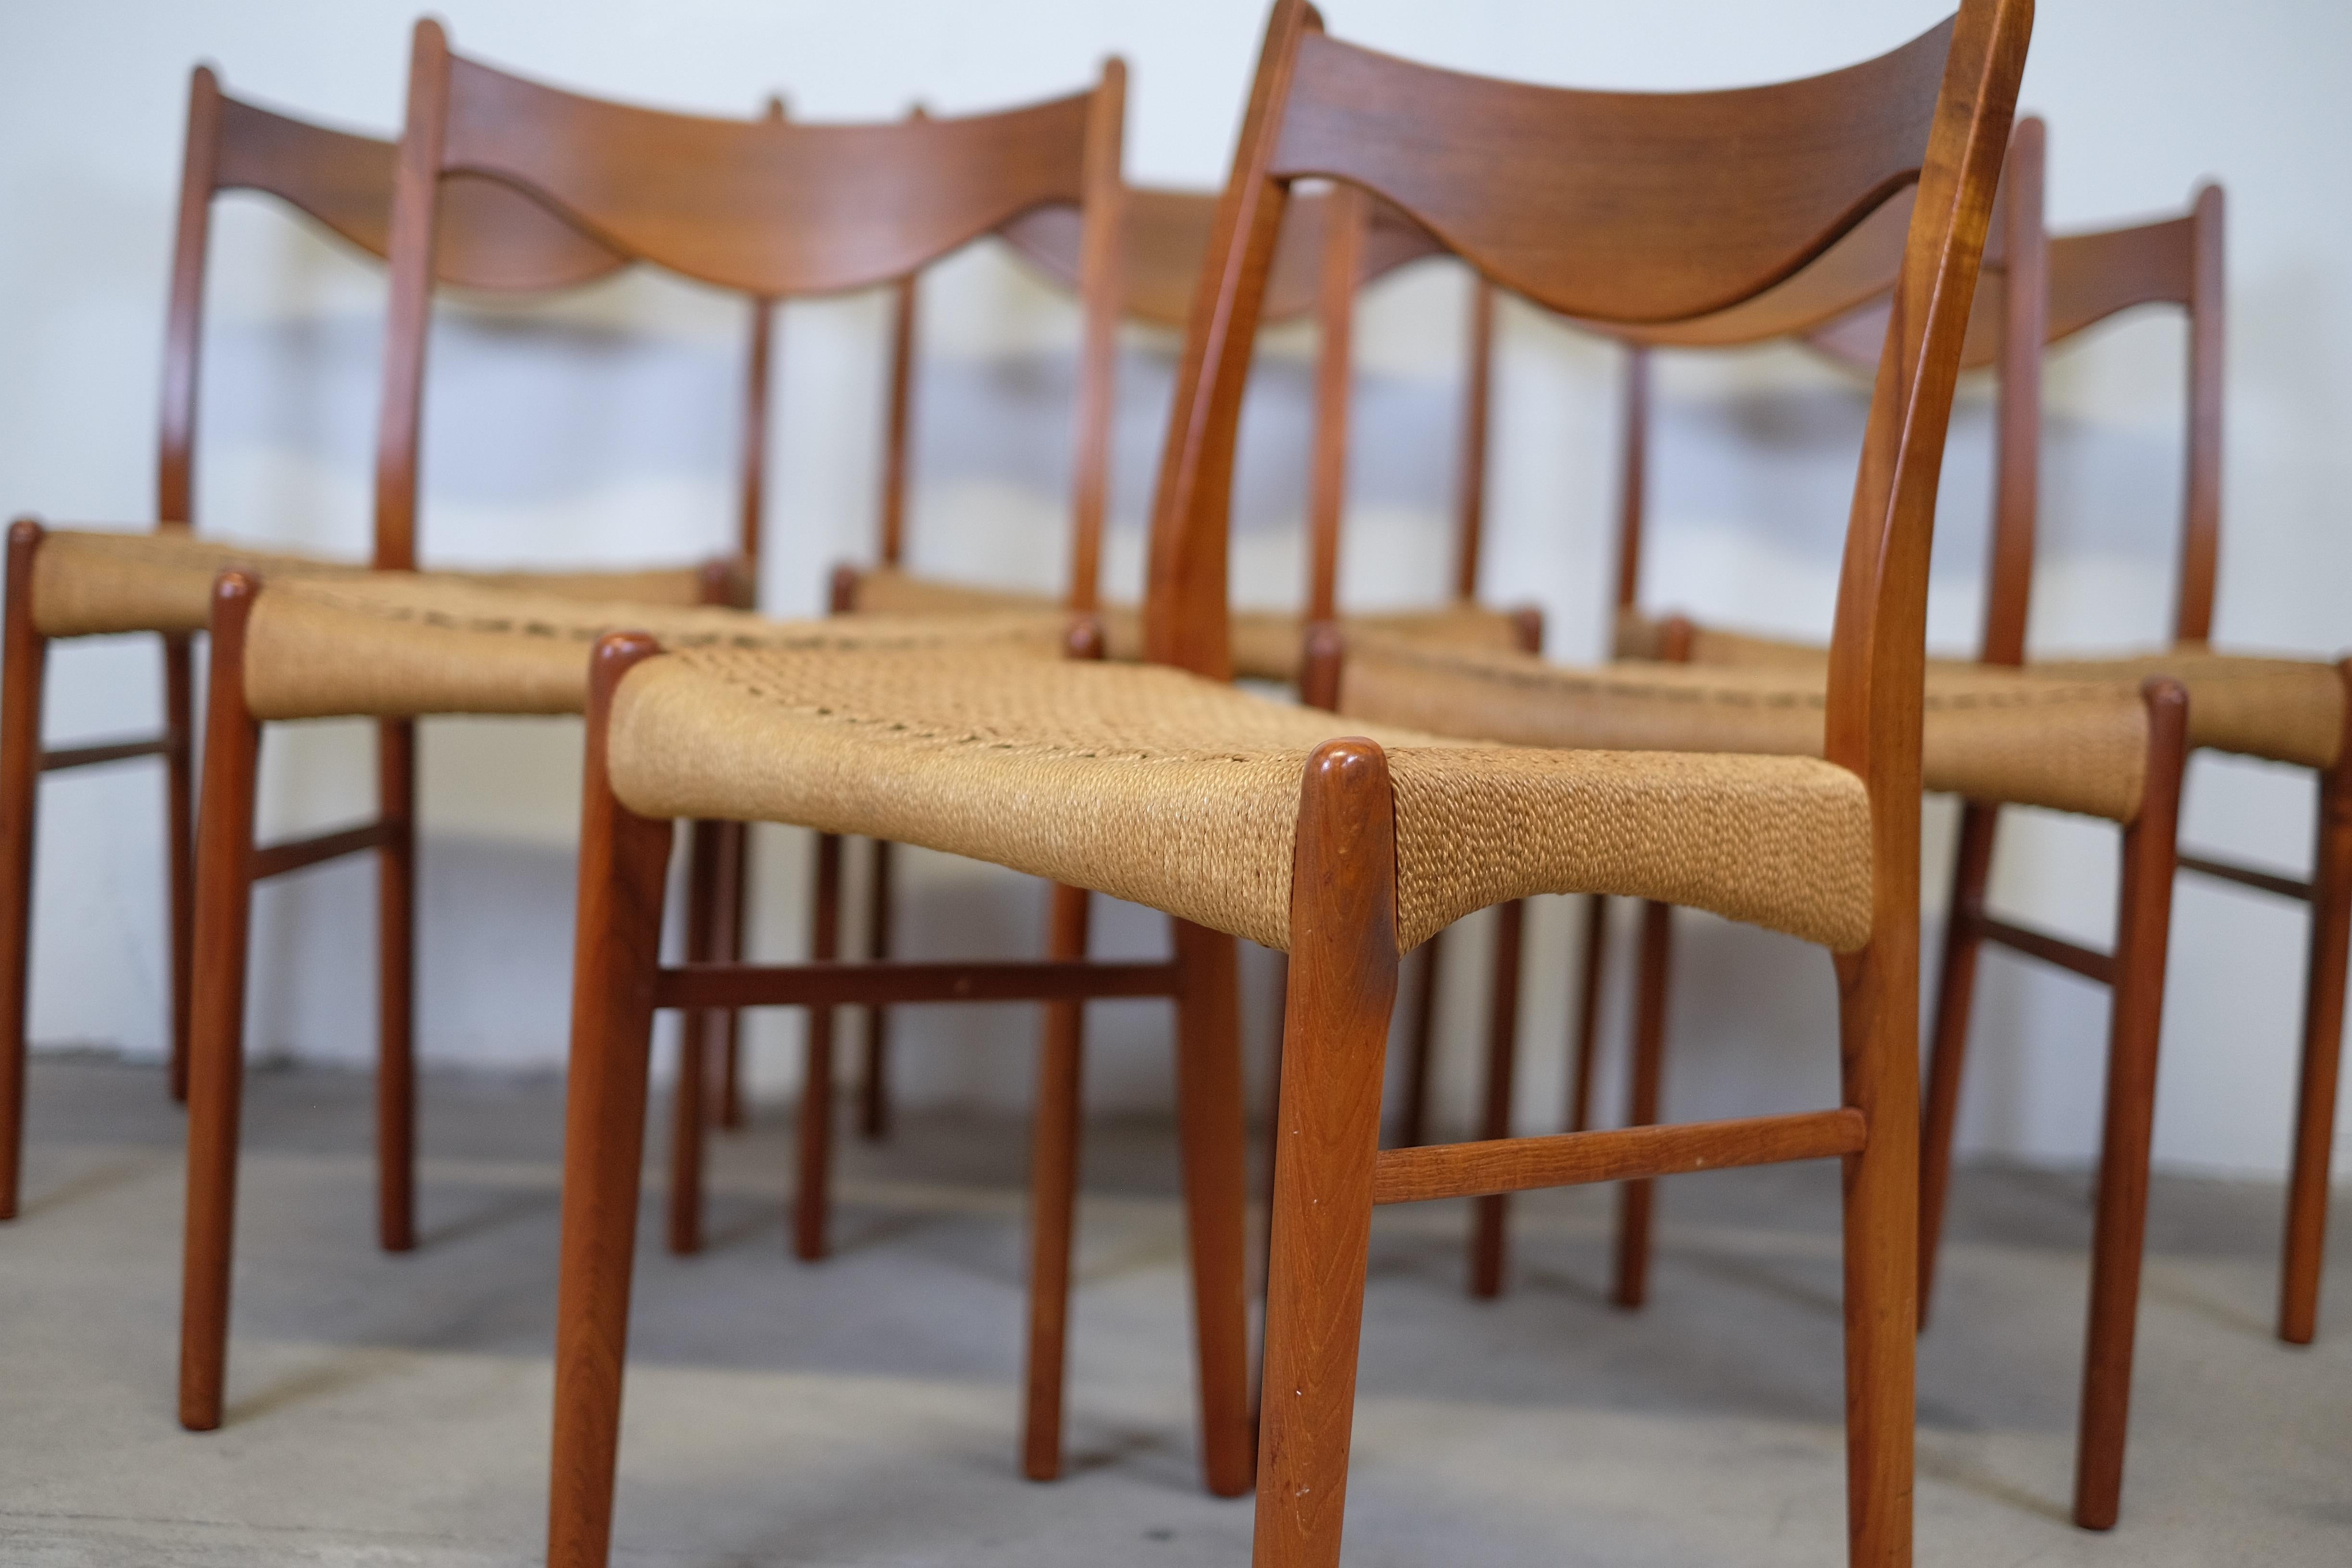 Mid-20th Century Set of Six Dining Chairs by Arne Wahl Iversen for Glyngøre Stolefabrik, Danish For Sale